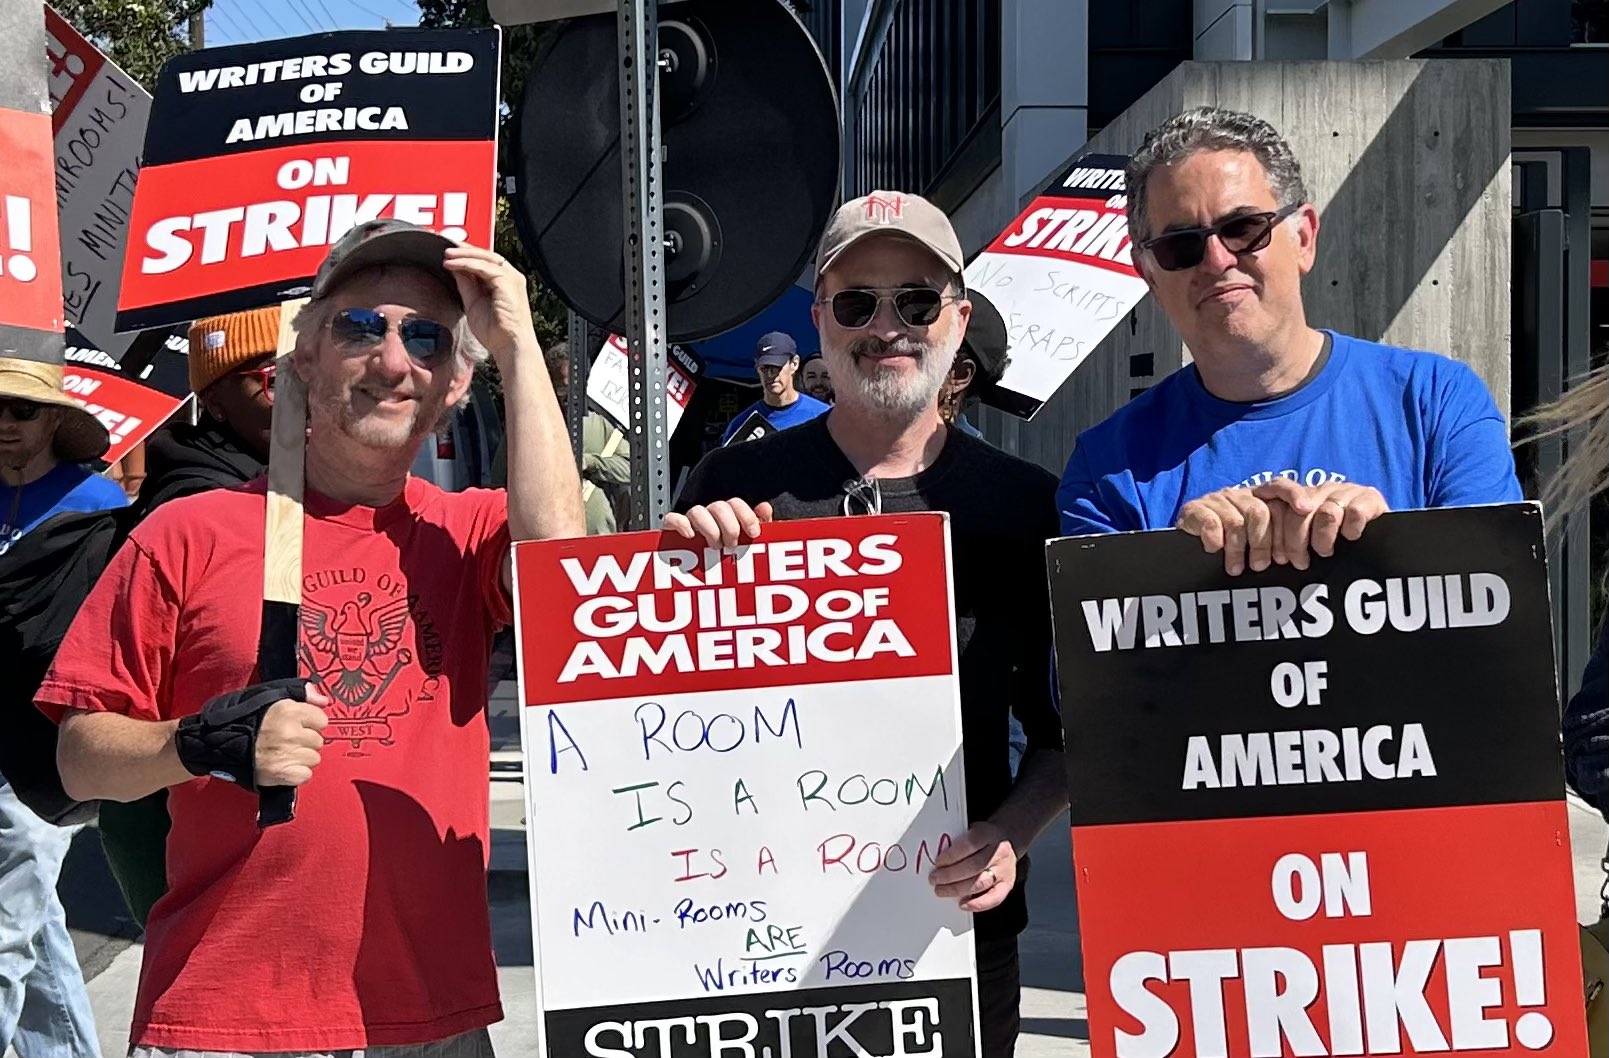 United States Screenwriters strike for a living wage and job security